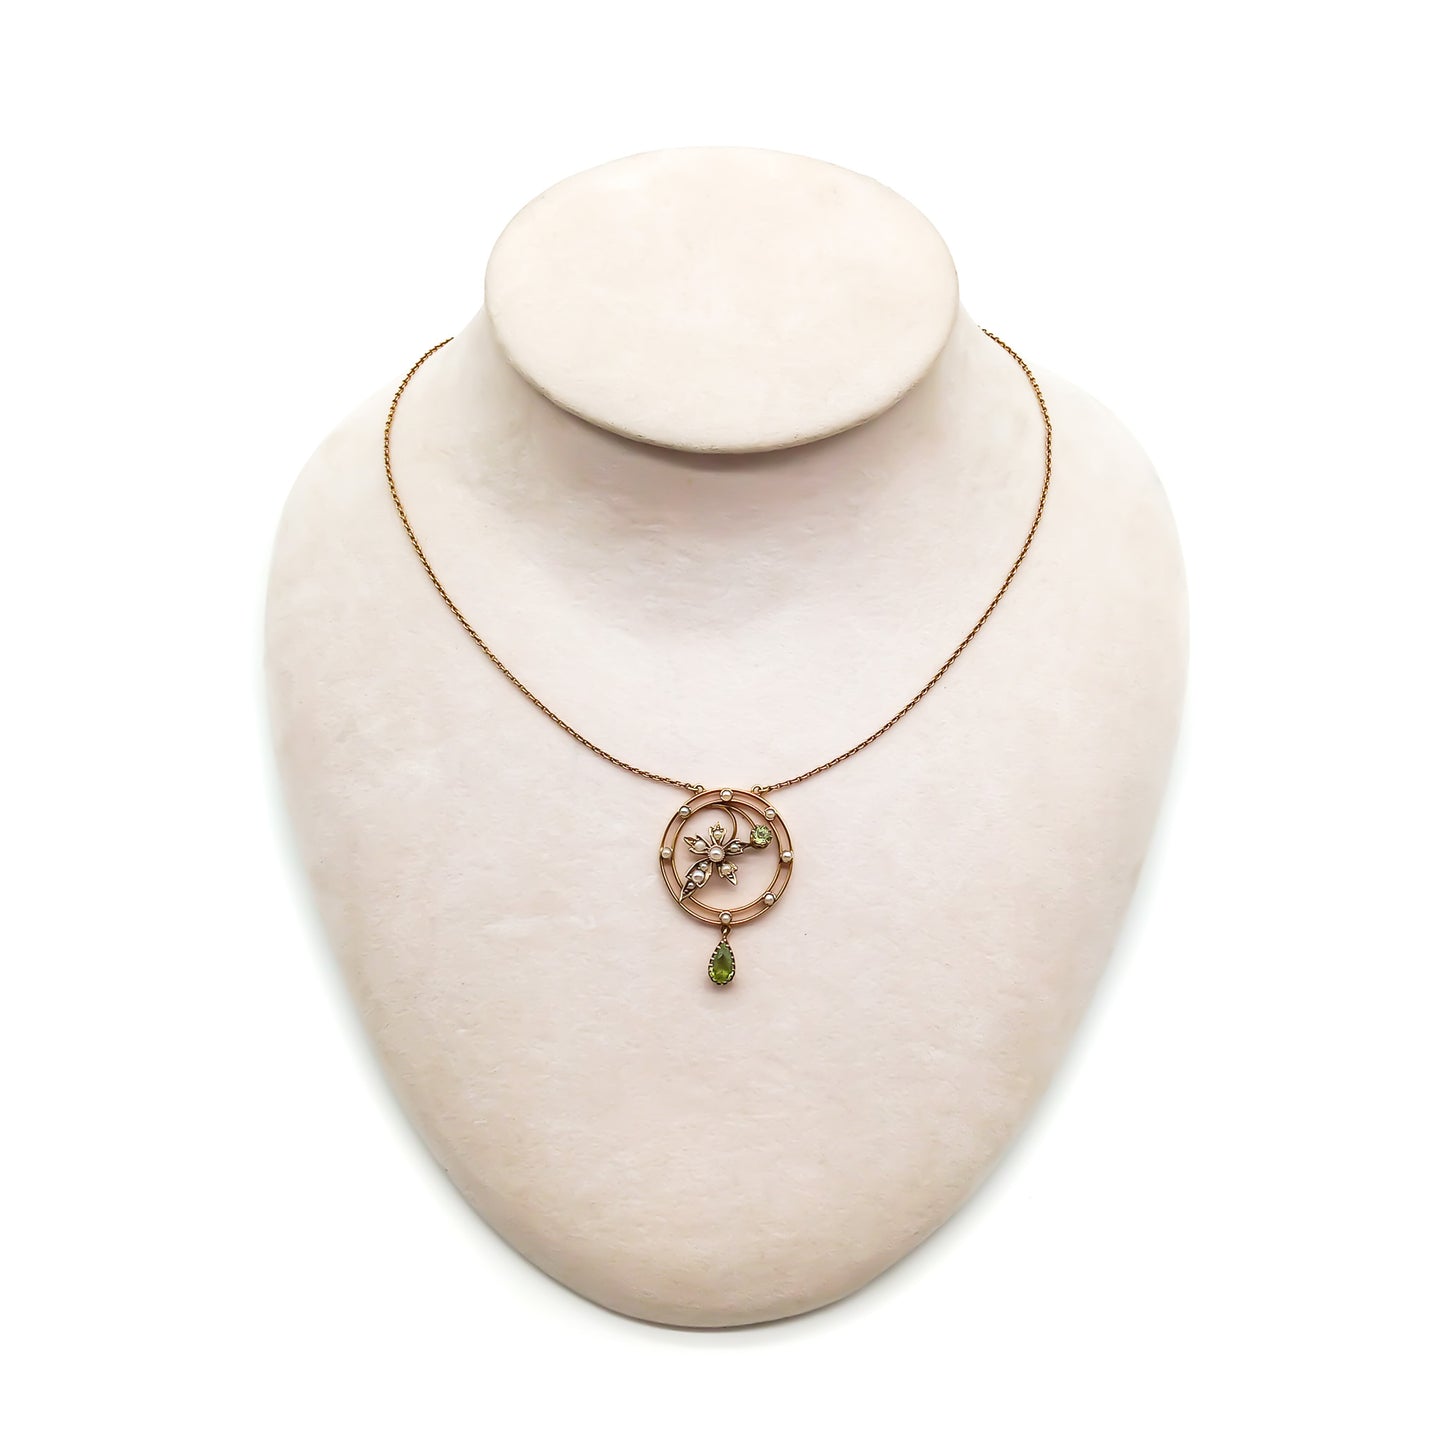 Charming Edwardian 9ct gold seed pearl and peridot pendant attached to 9ct gold chain.